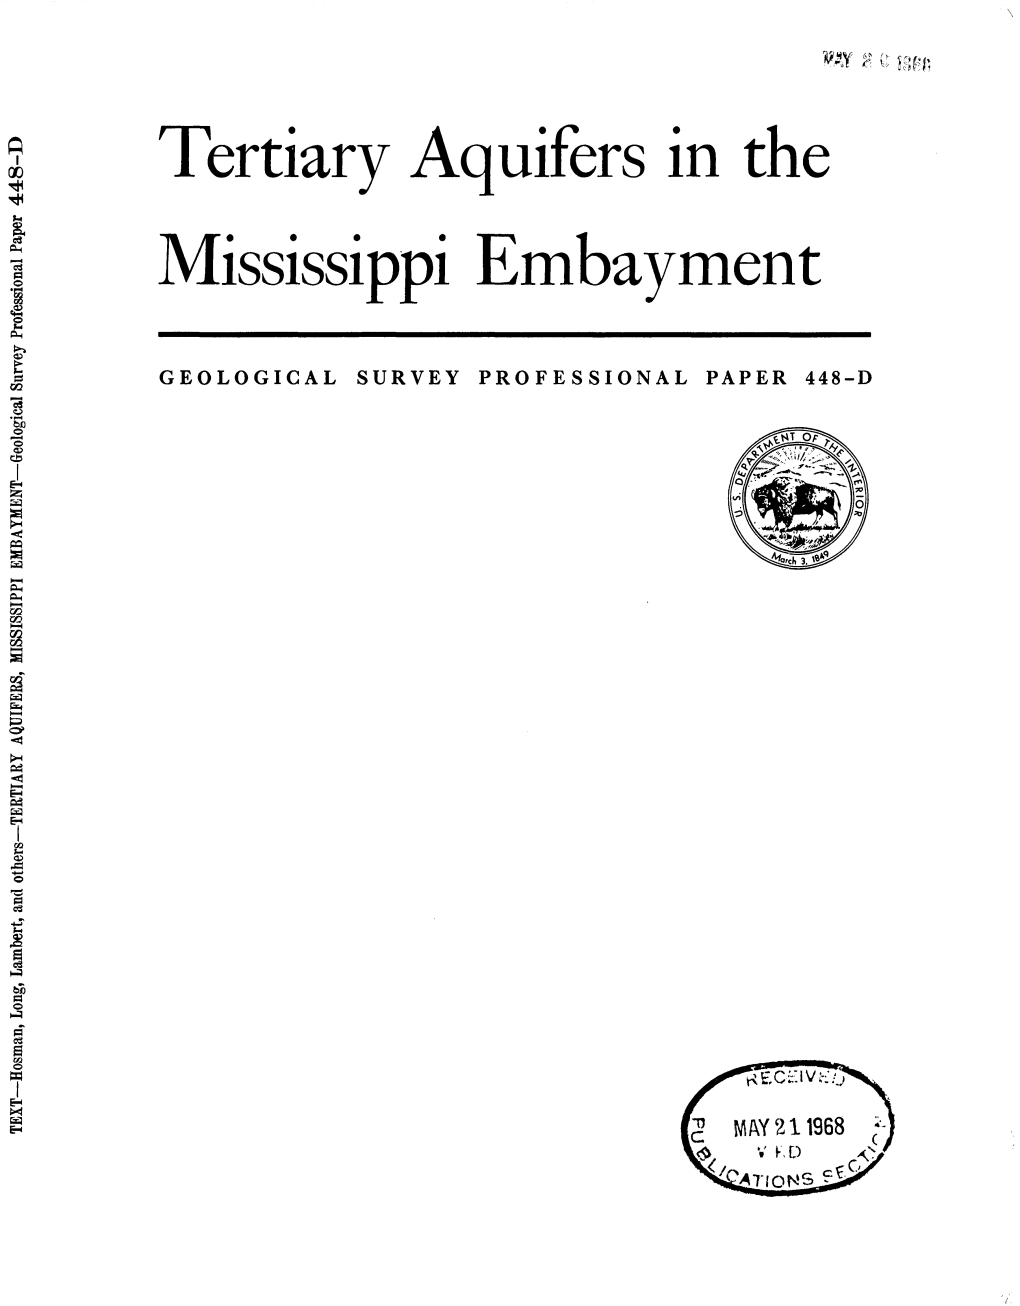 Tertiary Aquifers in the Mississippi Embayment S PH